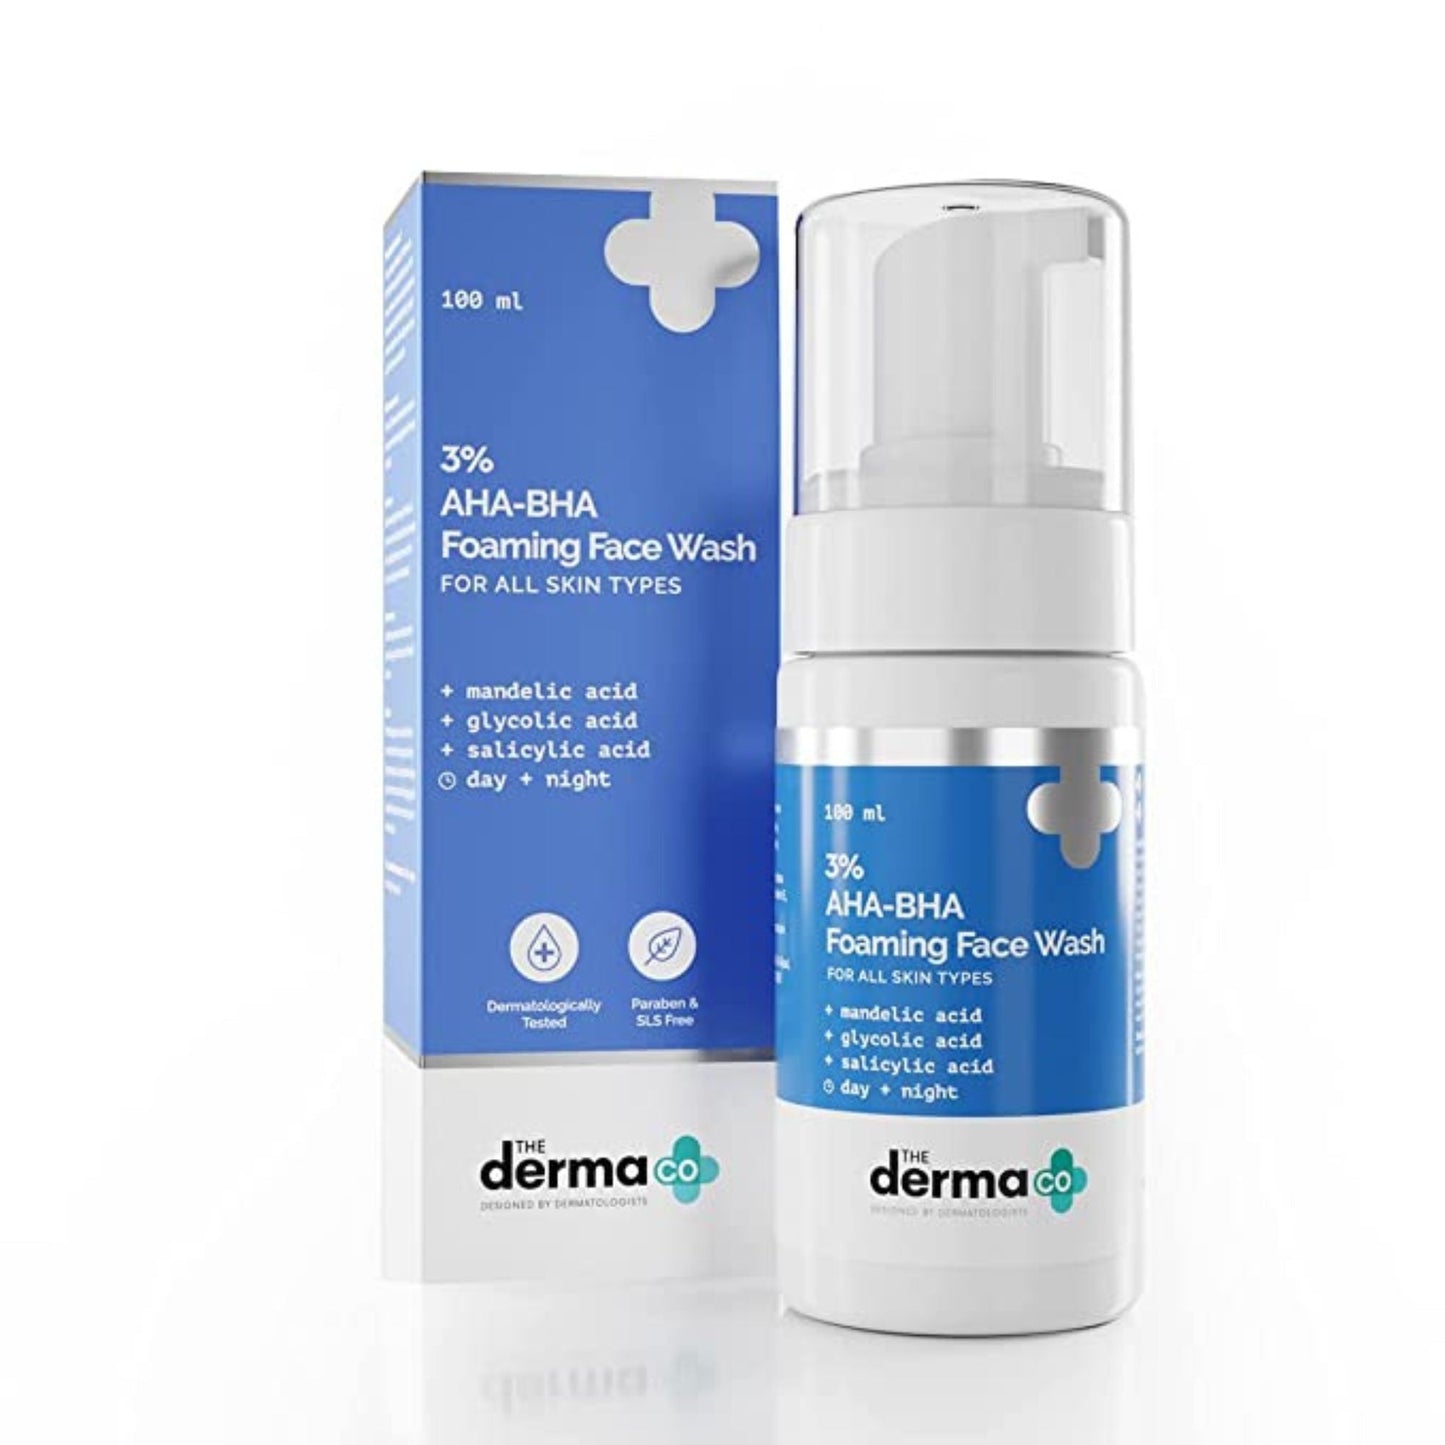 The Derma Co 3% AHA-BHA Foaming Face Wash, Anti Acne Foaming Cleanser for Face- 100 ml(dermaco)